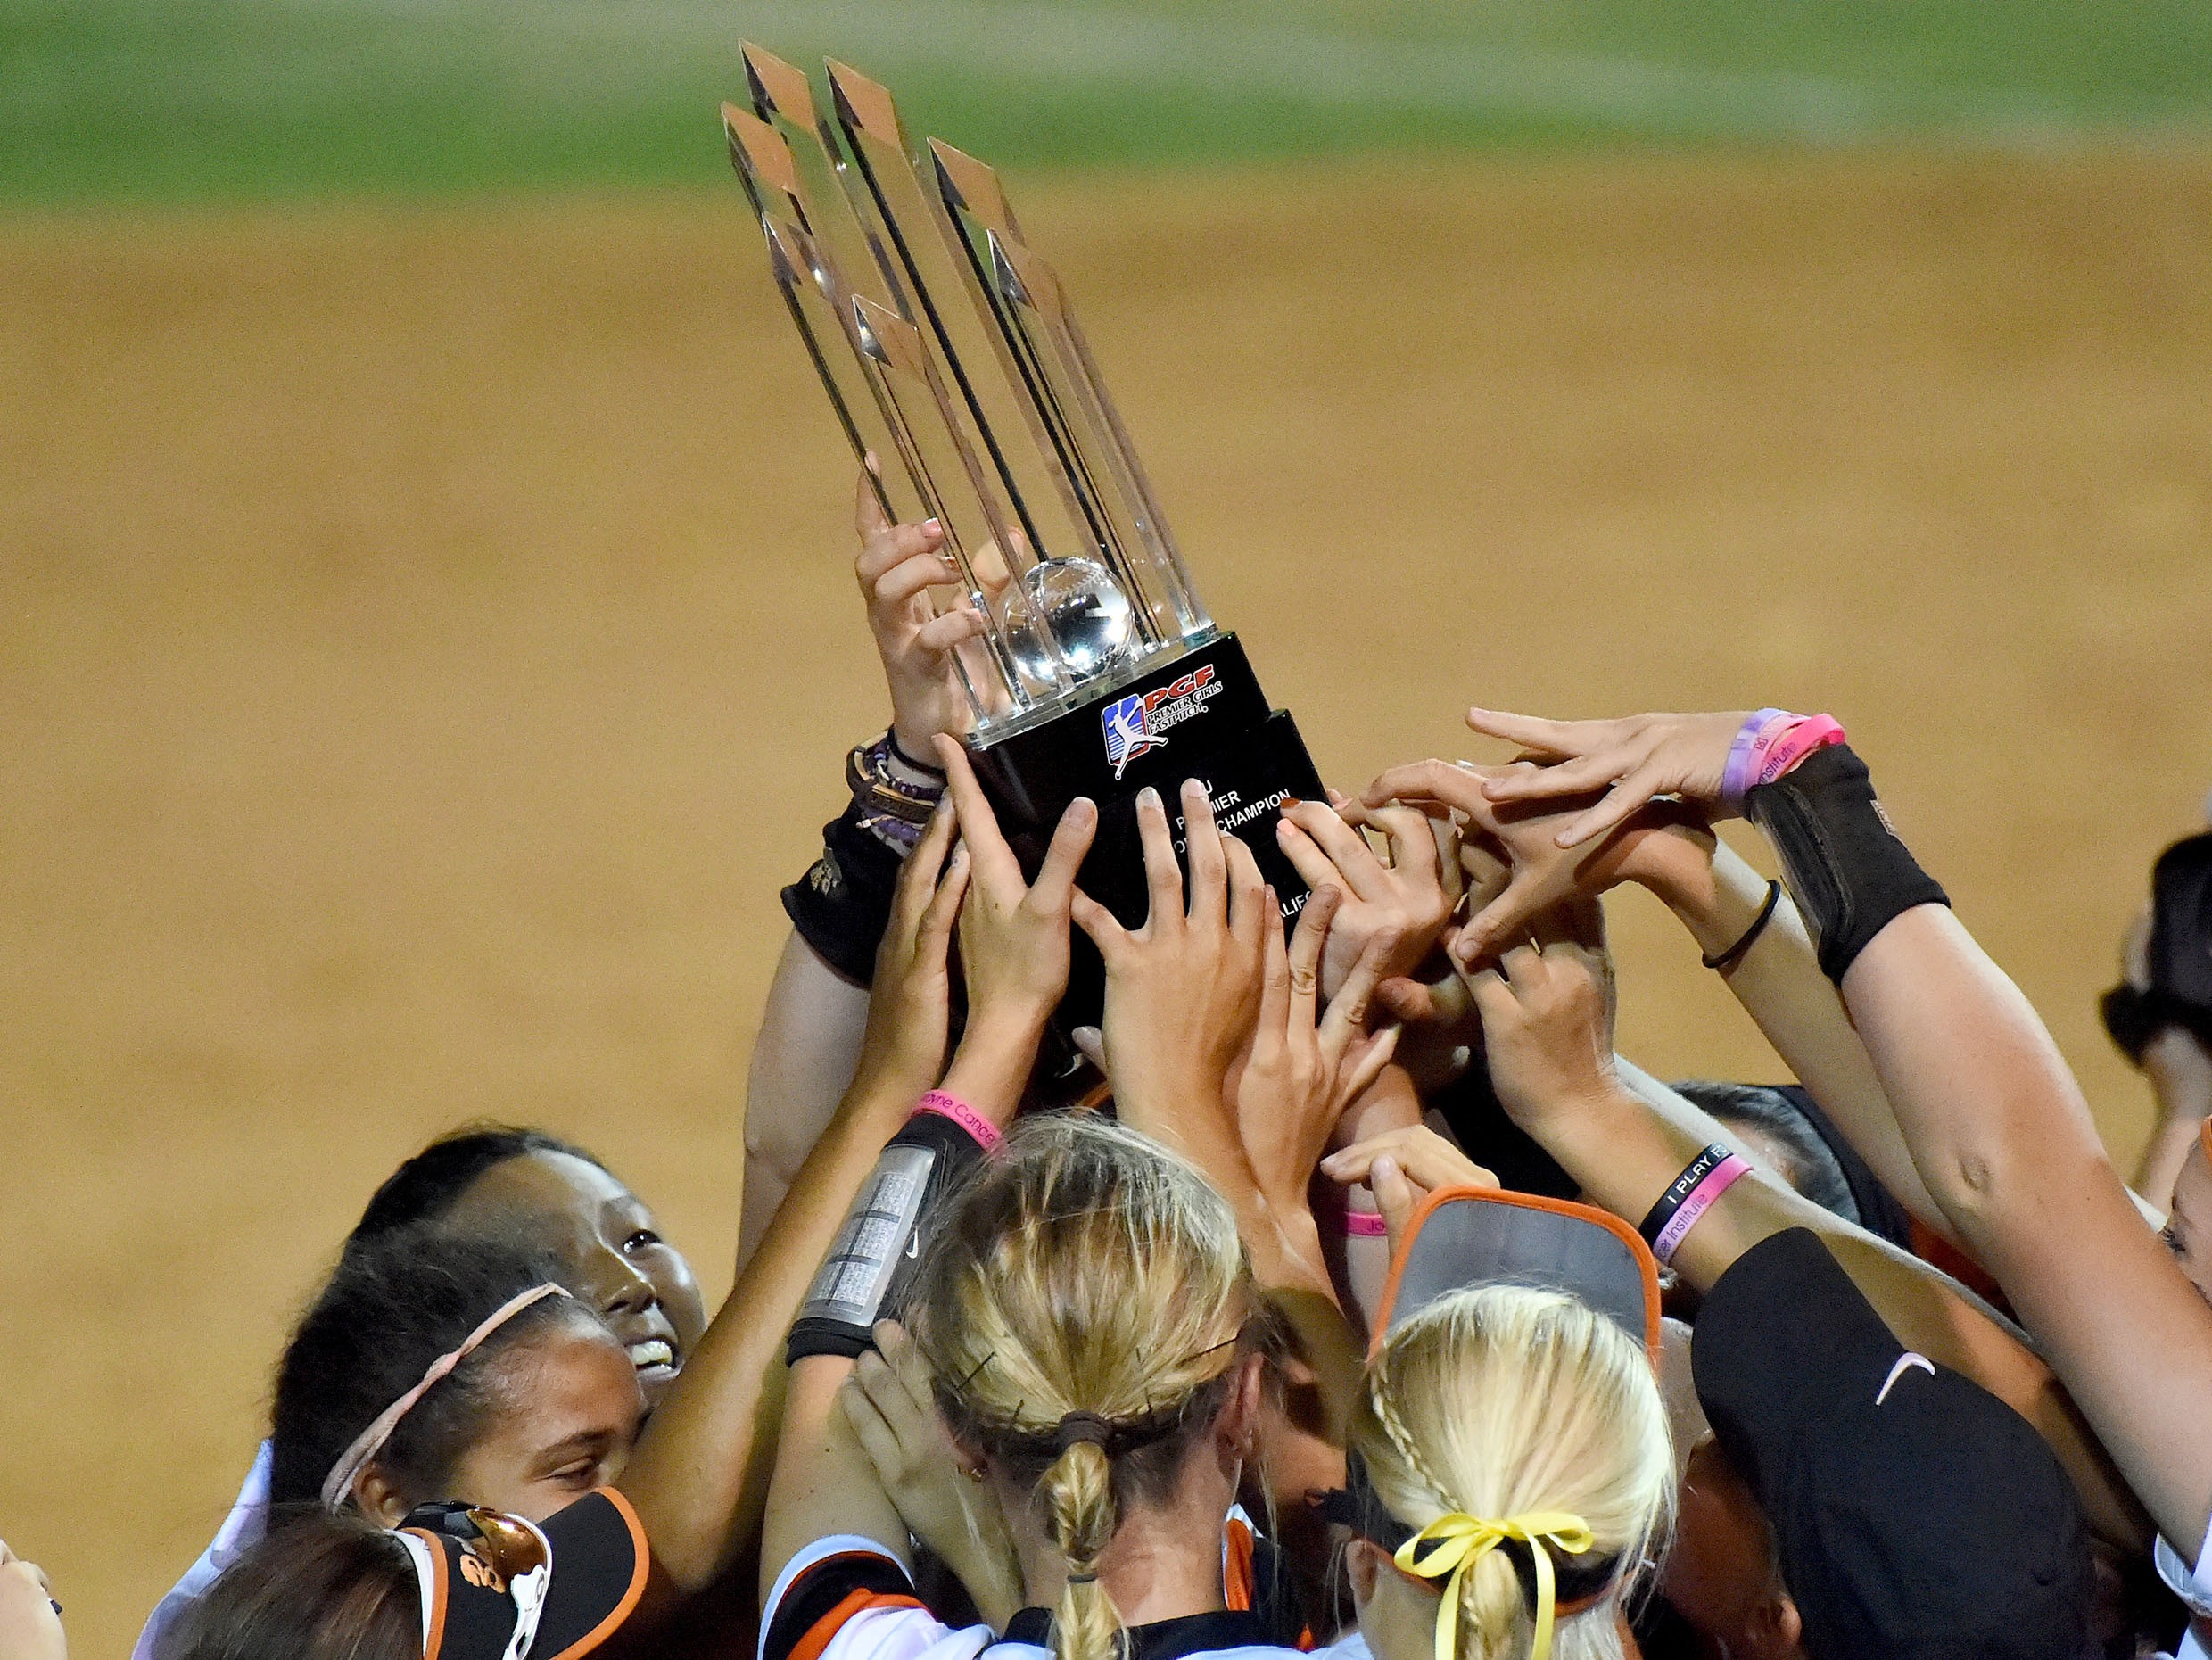 Texas A&M Softball: College Station Regional preview, schedule & TV info